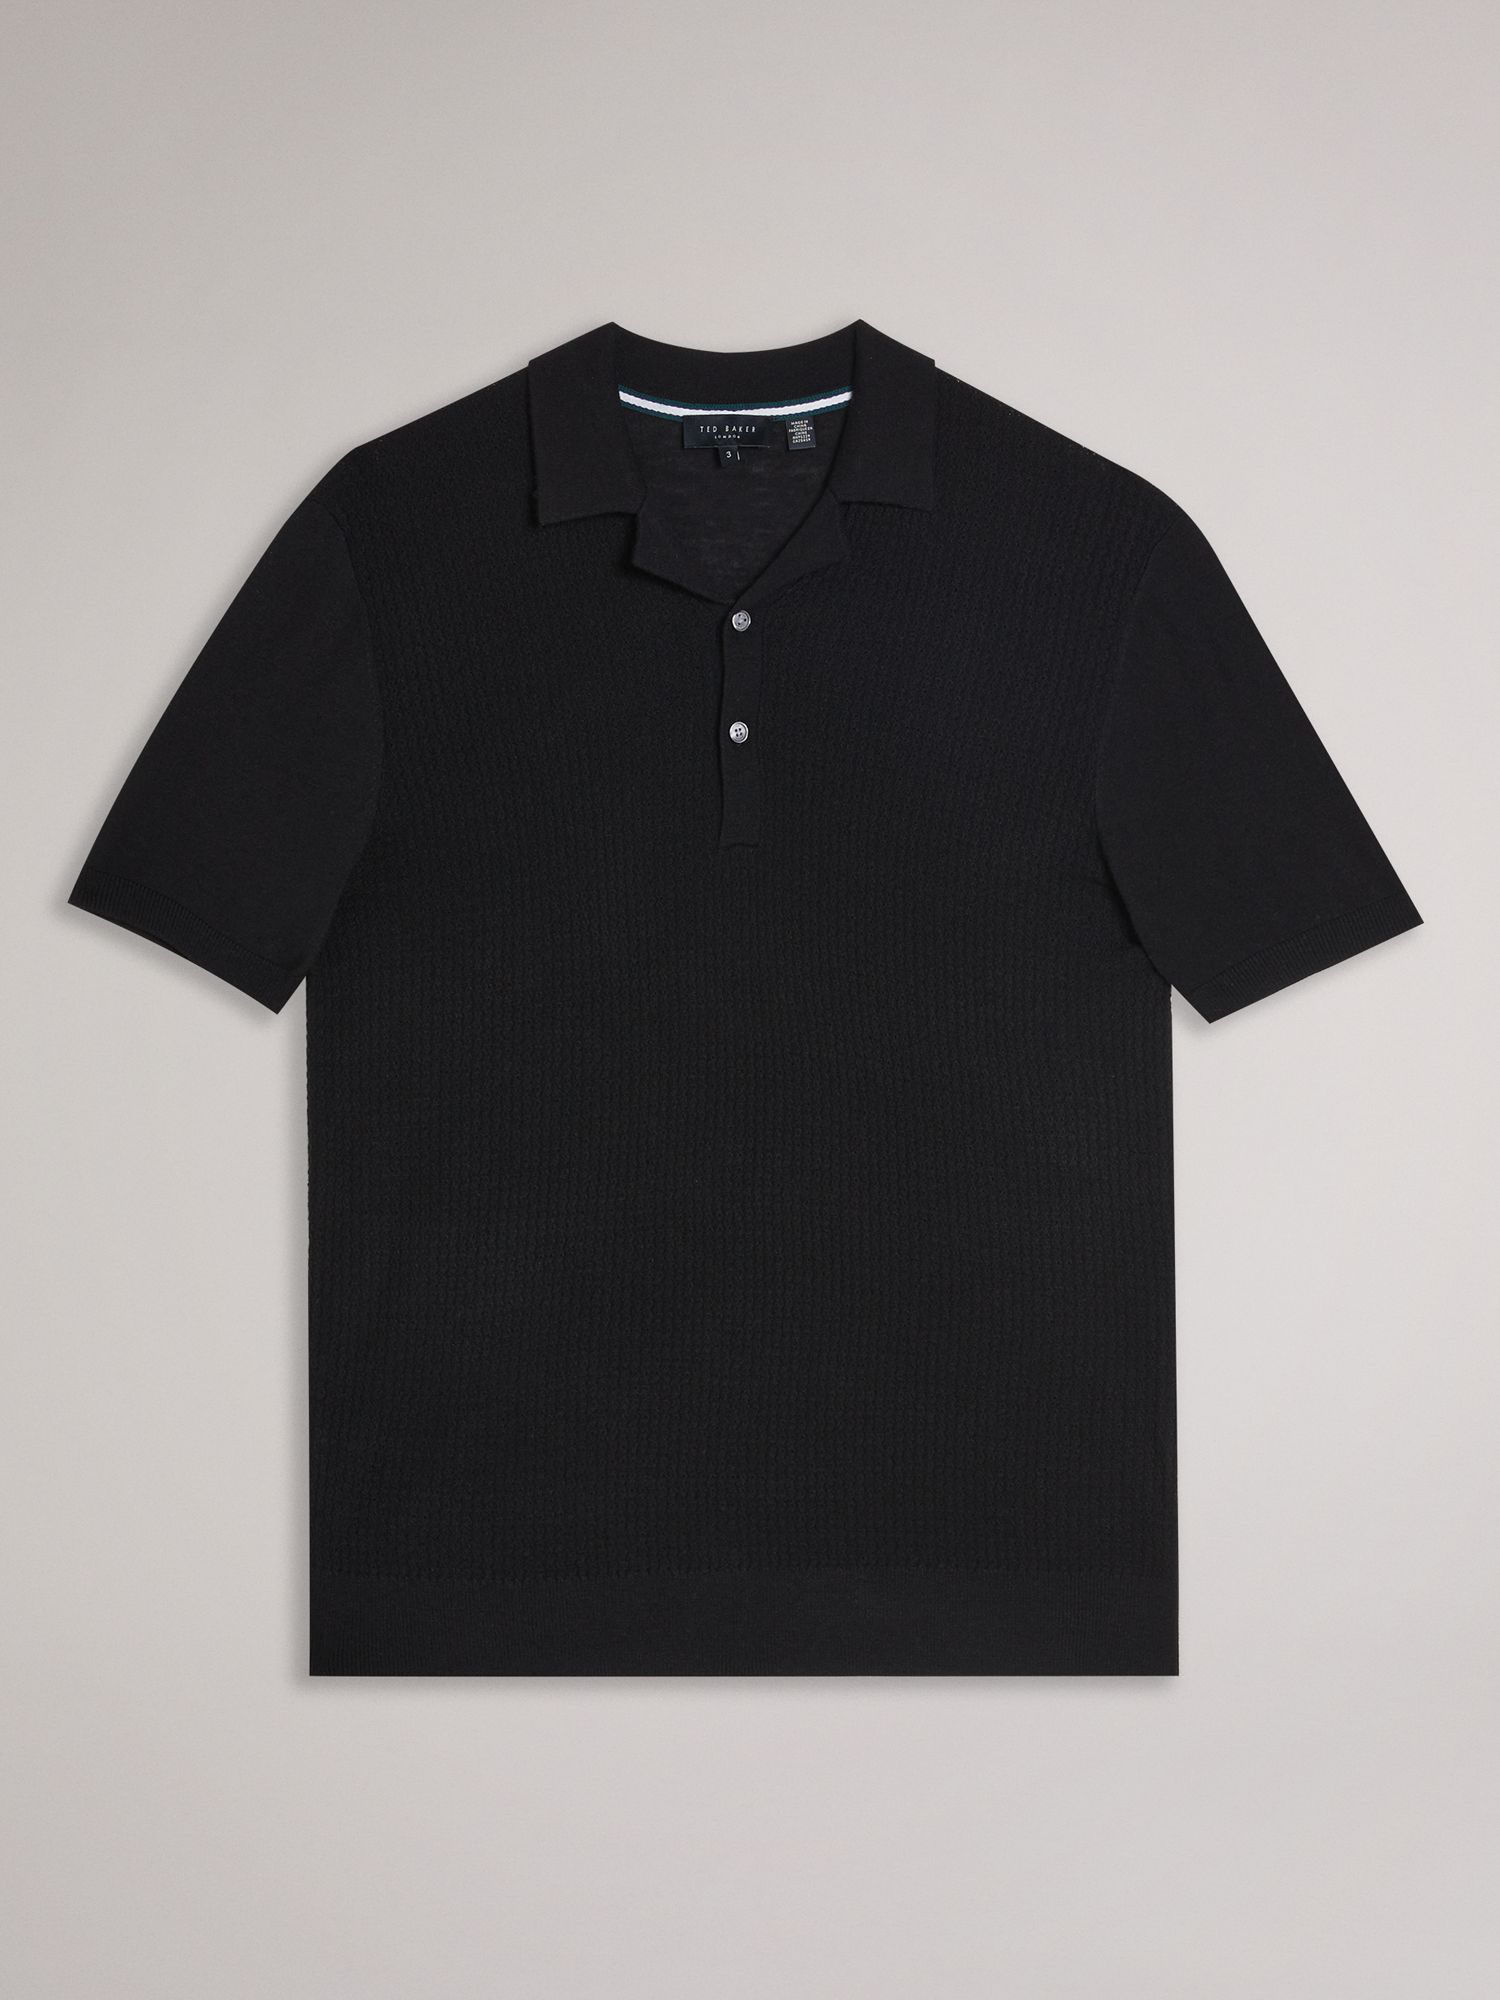 Ted Baker Adio Textured Front Polo Shirt, Black, S